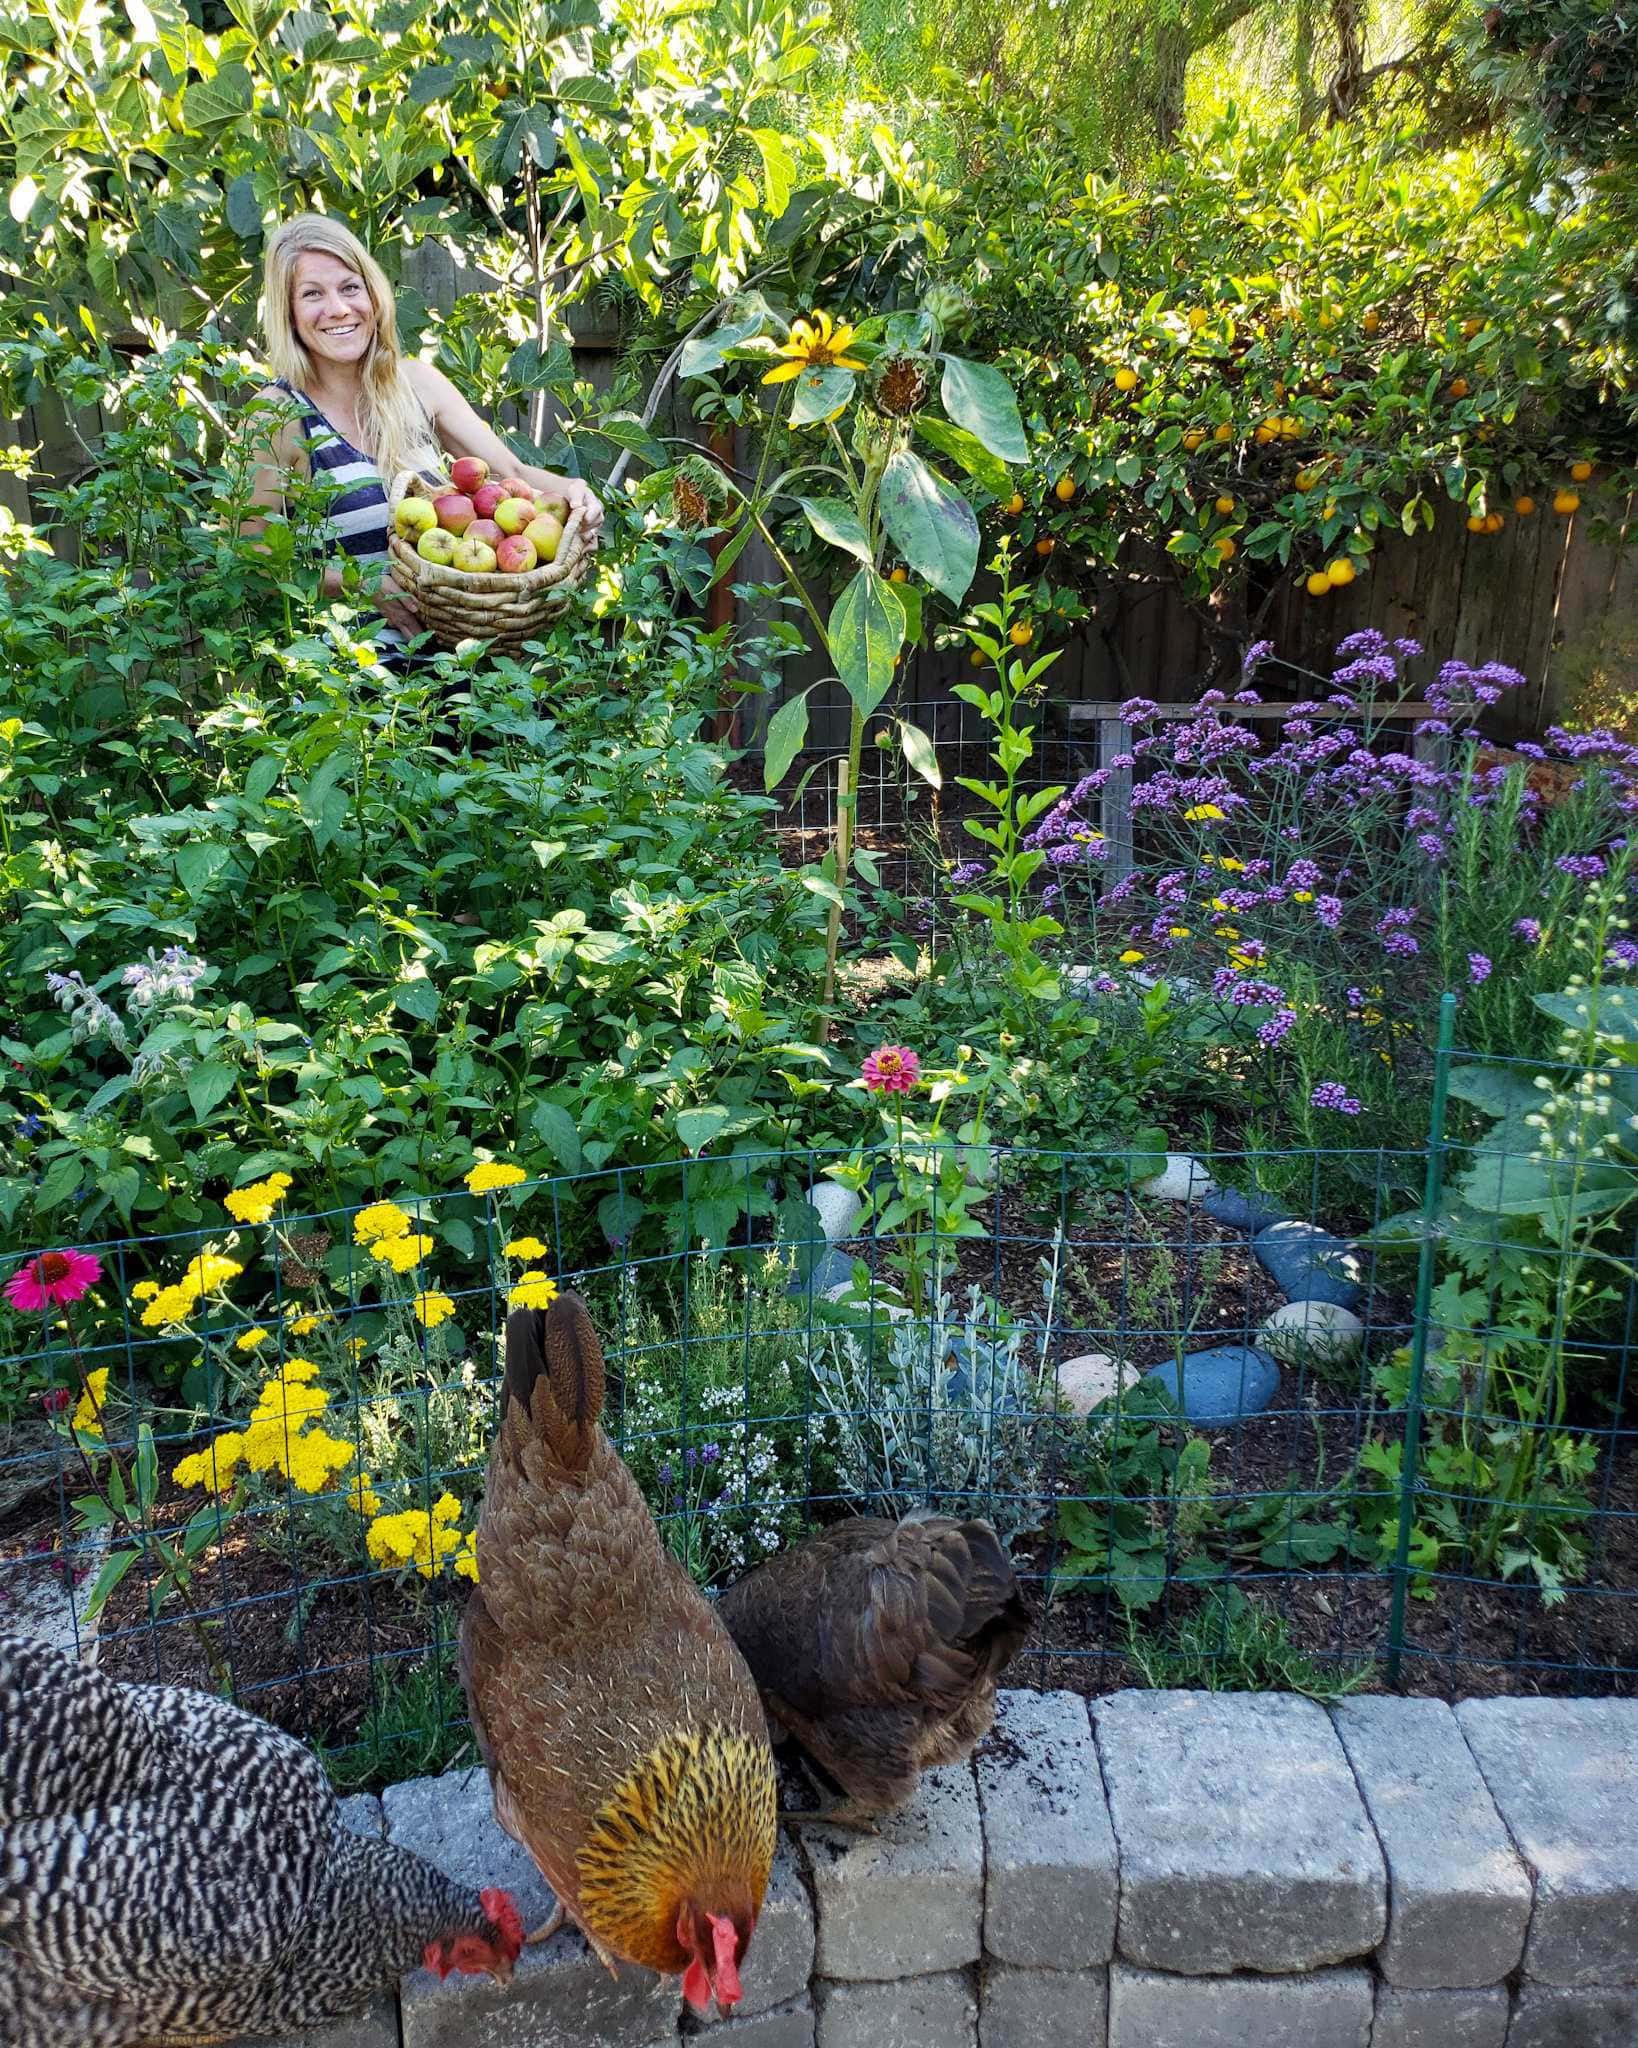 DeannaCat is standing on the far side of a raised stone pollinator island. She is holding a basket of apples and is standing next to a fig tree that has blended in with the rest of the trees in the background as well as all of the perennials in the foreground. There are also three chickens sitting on the edge of the stone island in the immediate foreground, the colors of the image range from mostly greens to purple, yellow, and some pink. 